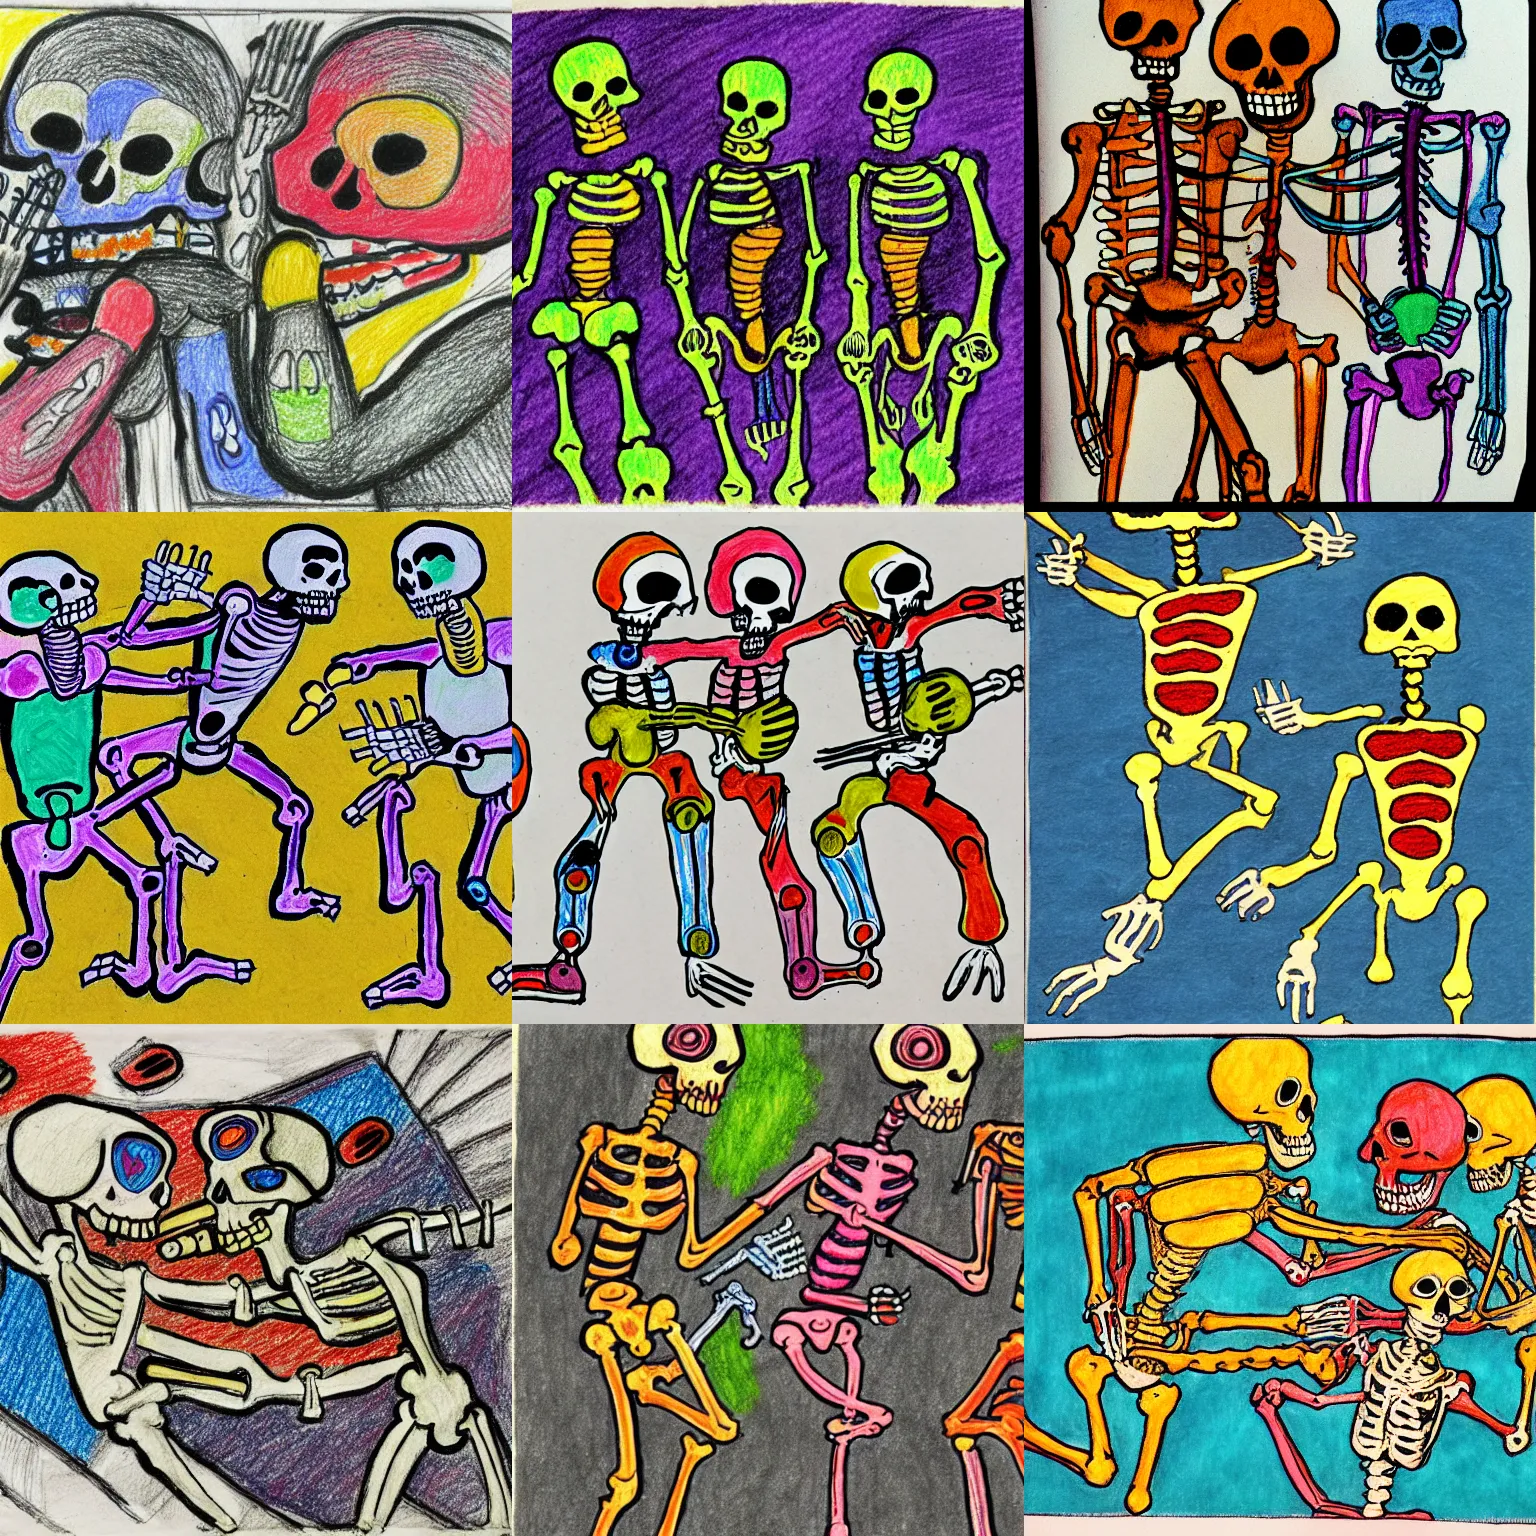 Prompt: colorful art brut drawing of three skeletons fighting over a piece of bread, found doodled in a sketchbook